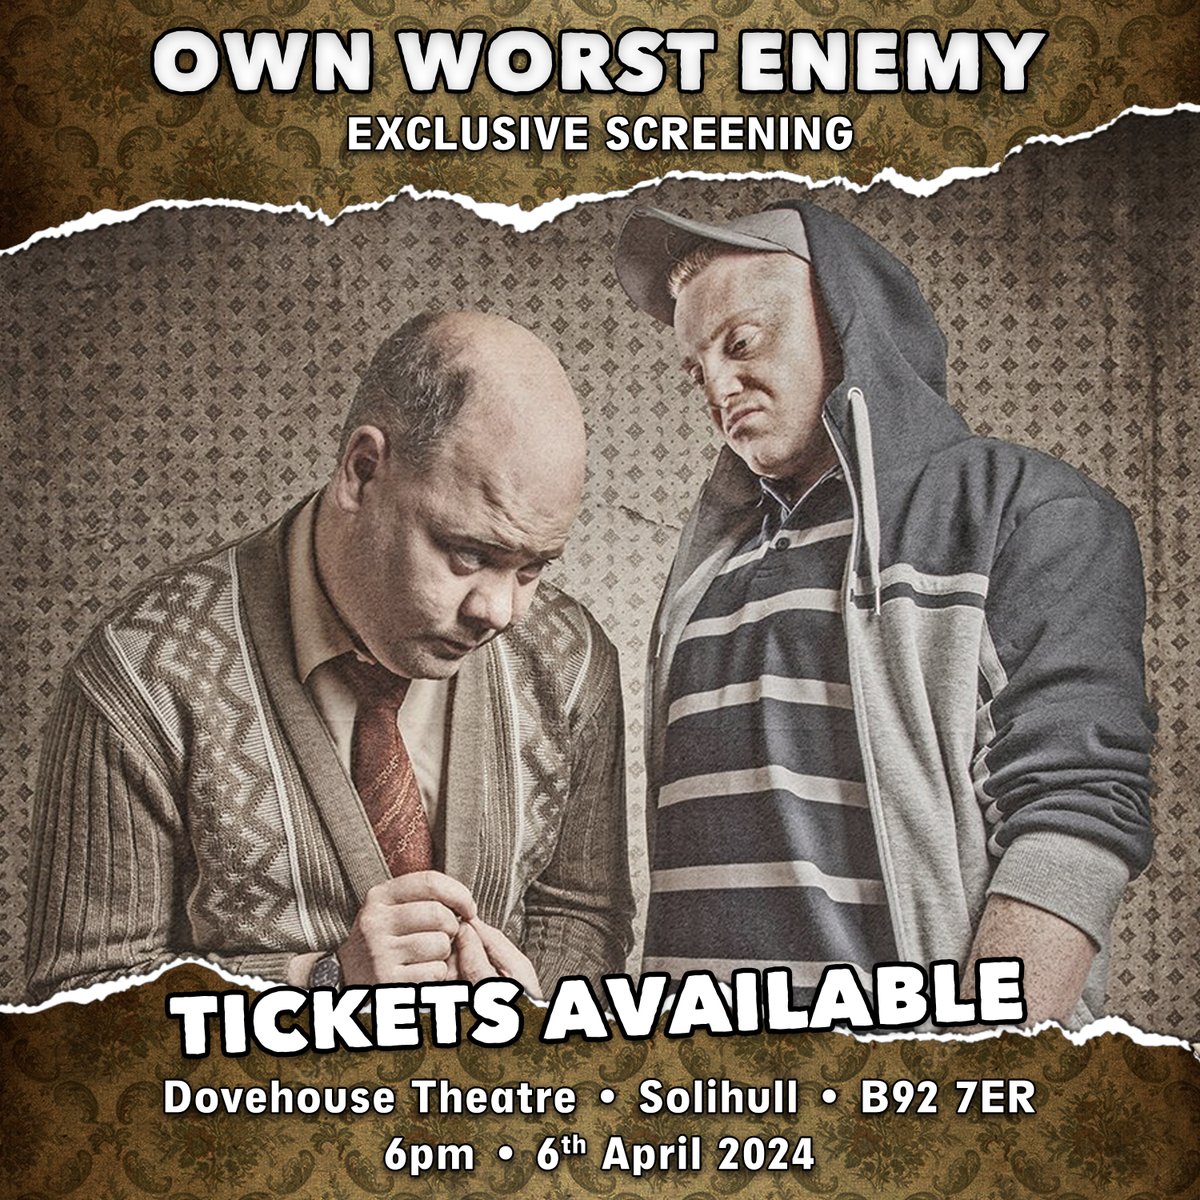 🎉 Happy Friday. Hope you've all had a productive week and have a brilliant weekend lined up. 🎟️ We're screening our micro-budget feature 'Own Worst Enemy' on April 6th for the first time in Brum. Tickets are available for anyone who'd like to join us: eventbrite.co.uk/e/own-worst-en…